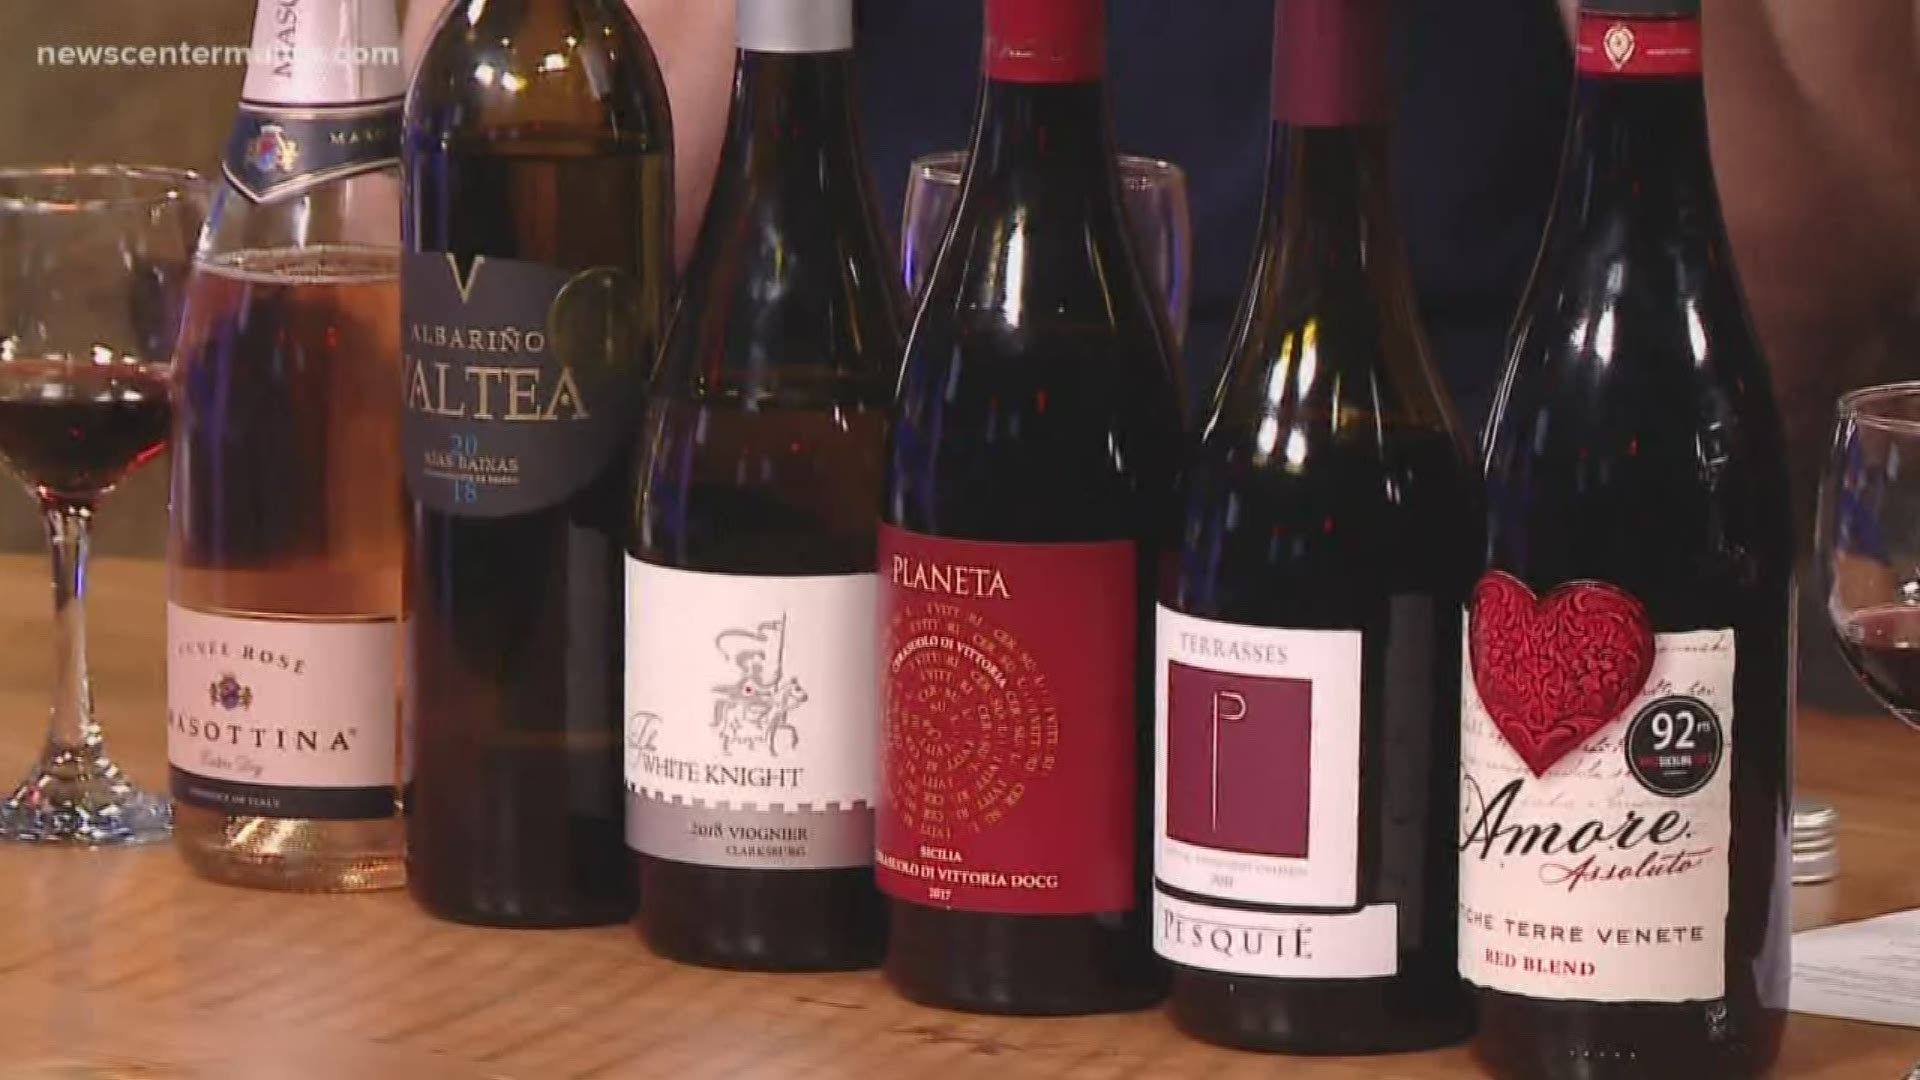 We look at a variety of wines for your Valentine's Day.